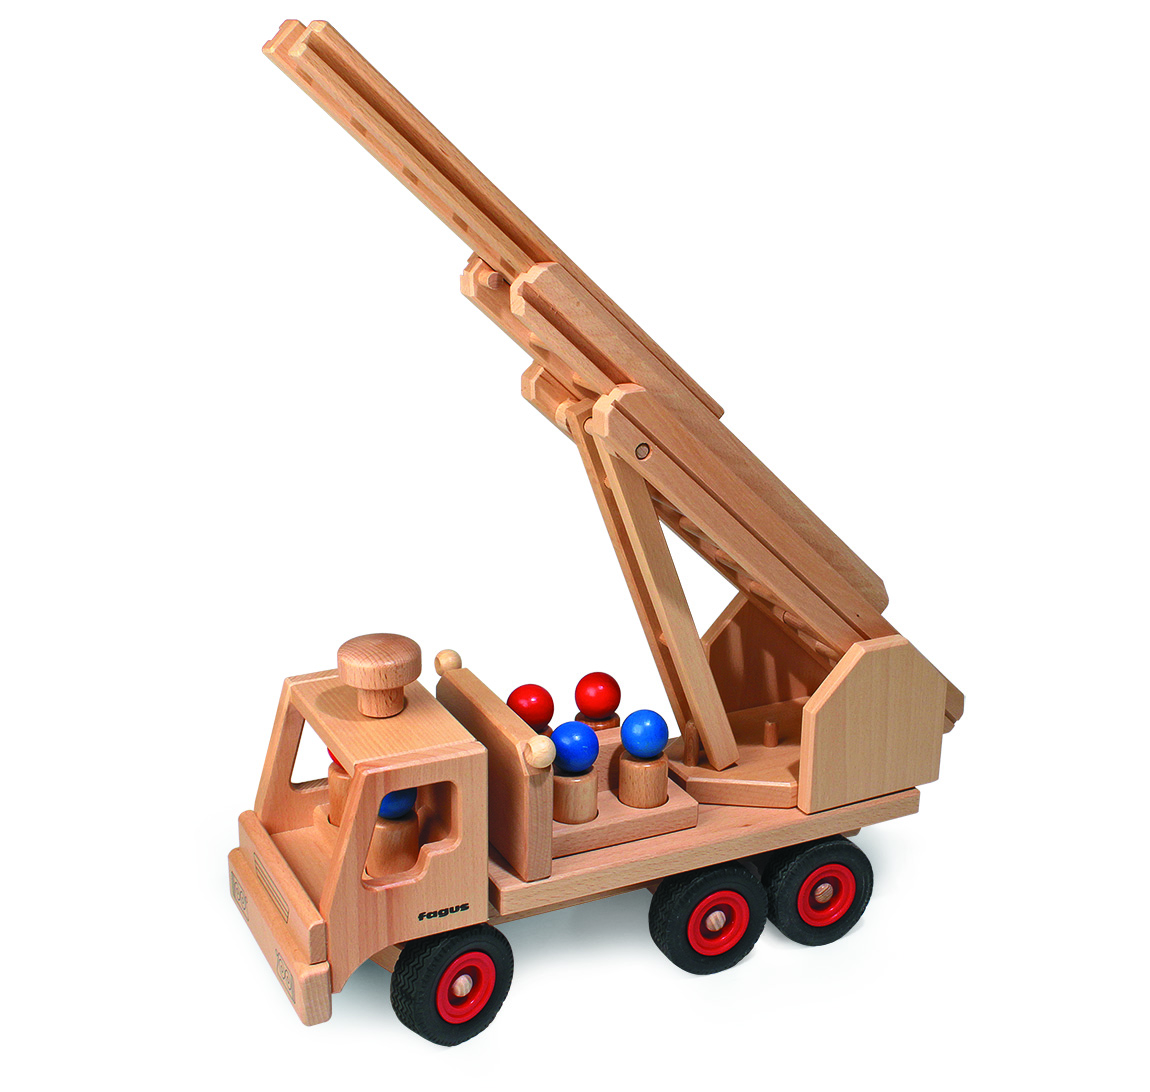 Wooden toys from fagus: Exciting worlds for young explorers